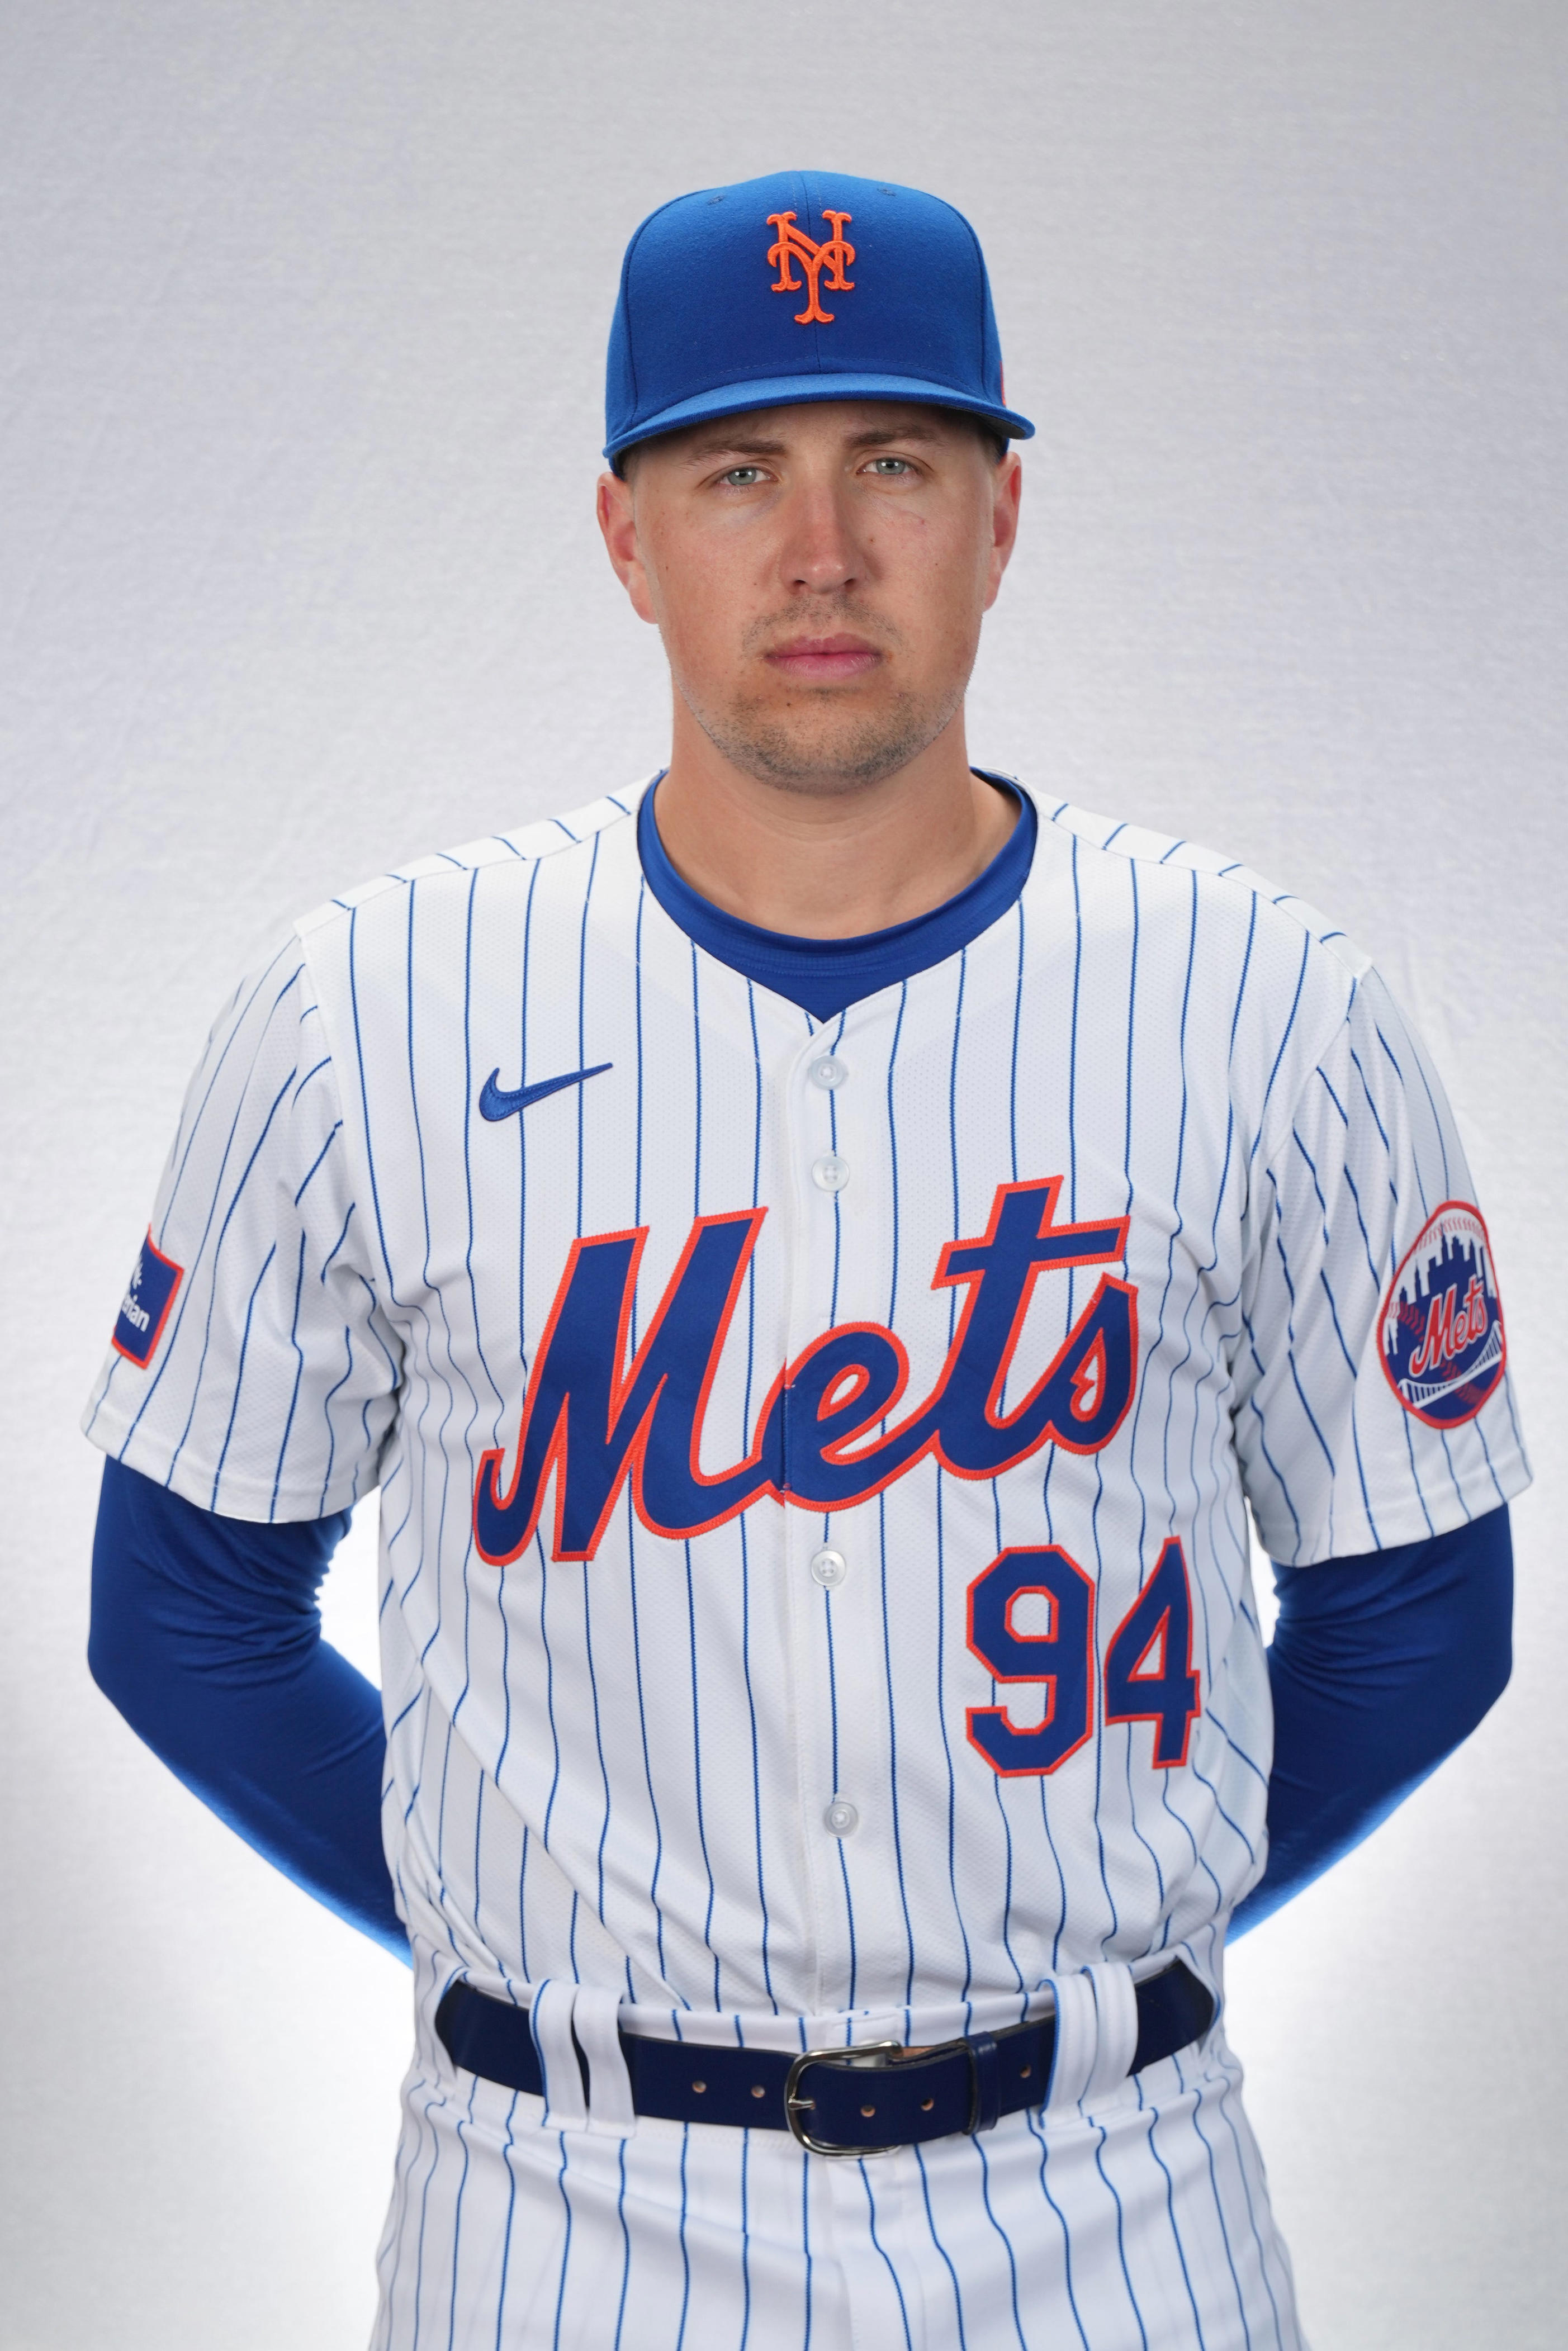 tylor megill cannot unlock new pitch, nate lavender makes impression in mets spring opener